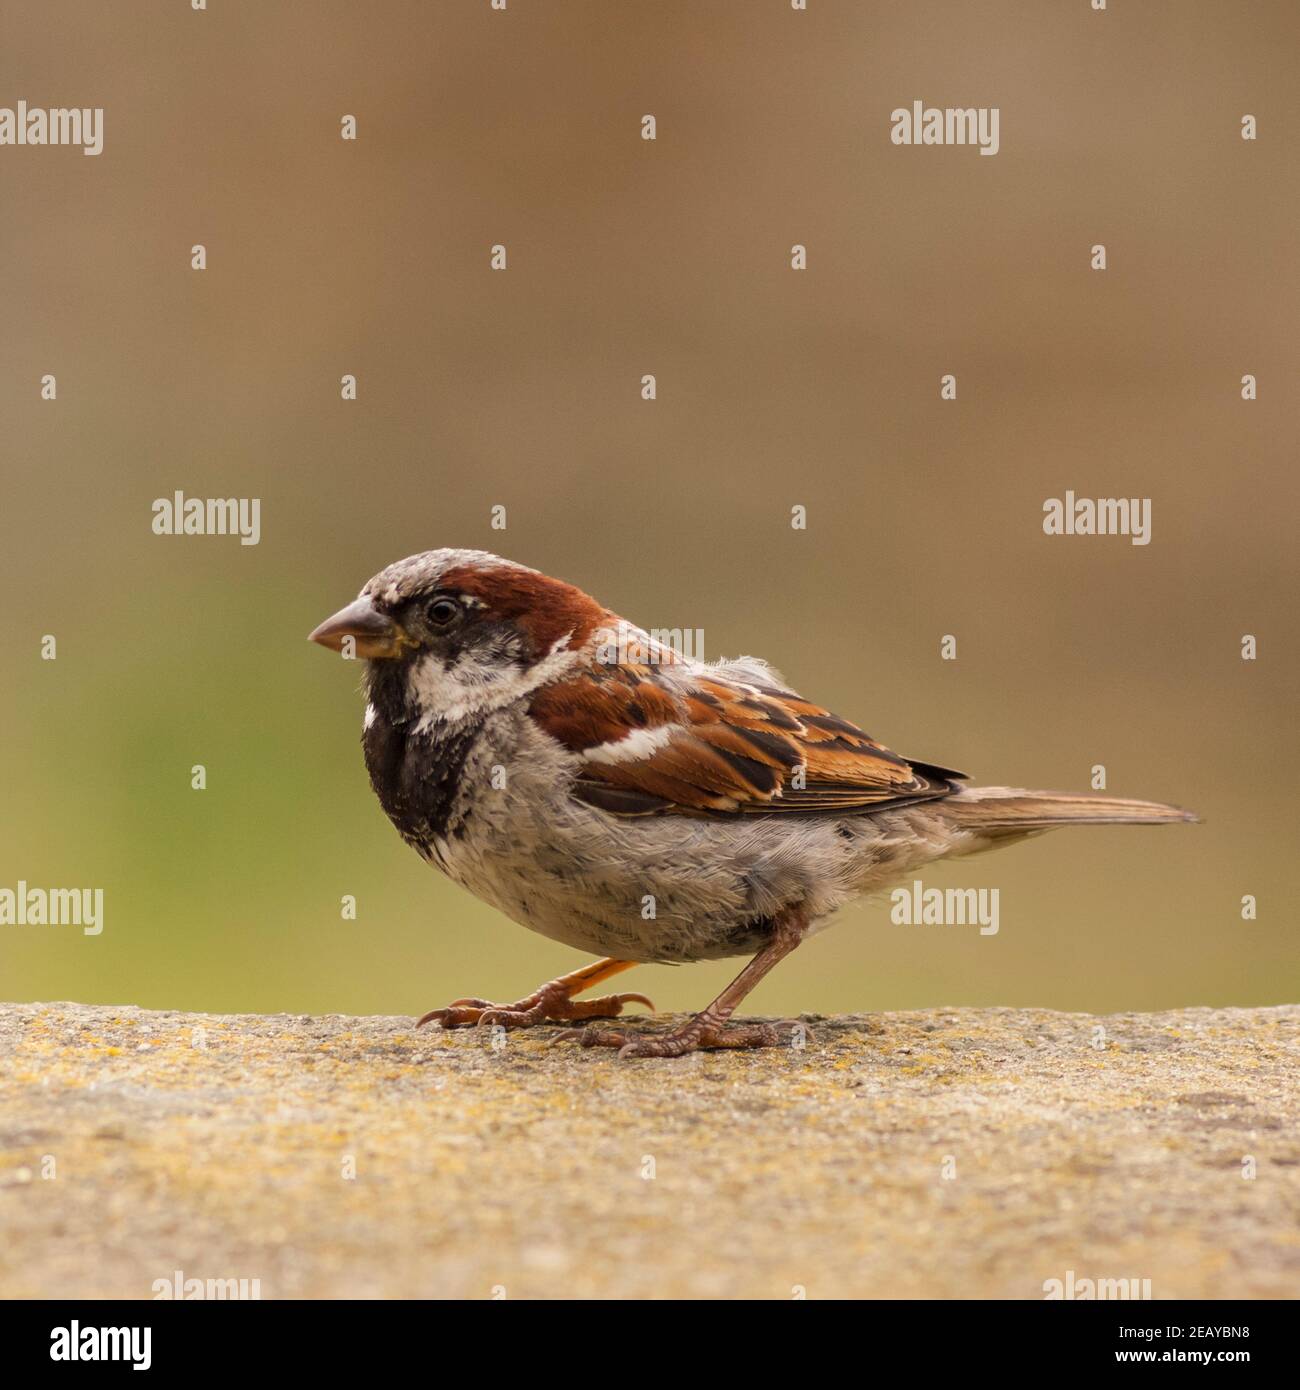 A close up bird portrait of a male house sparrow (passer domesticus) in a uk garden Stock Photo